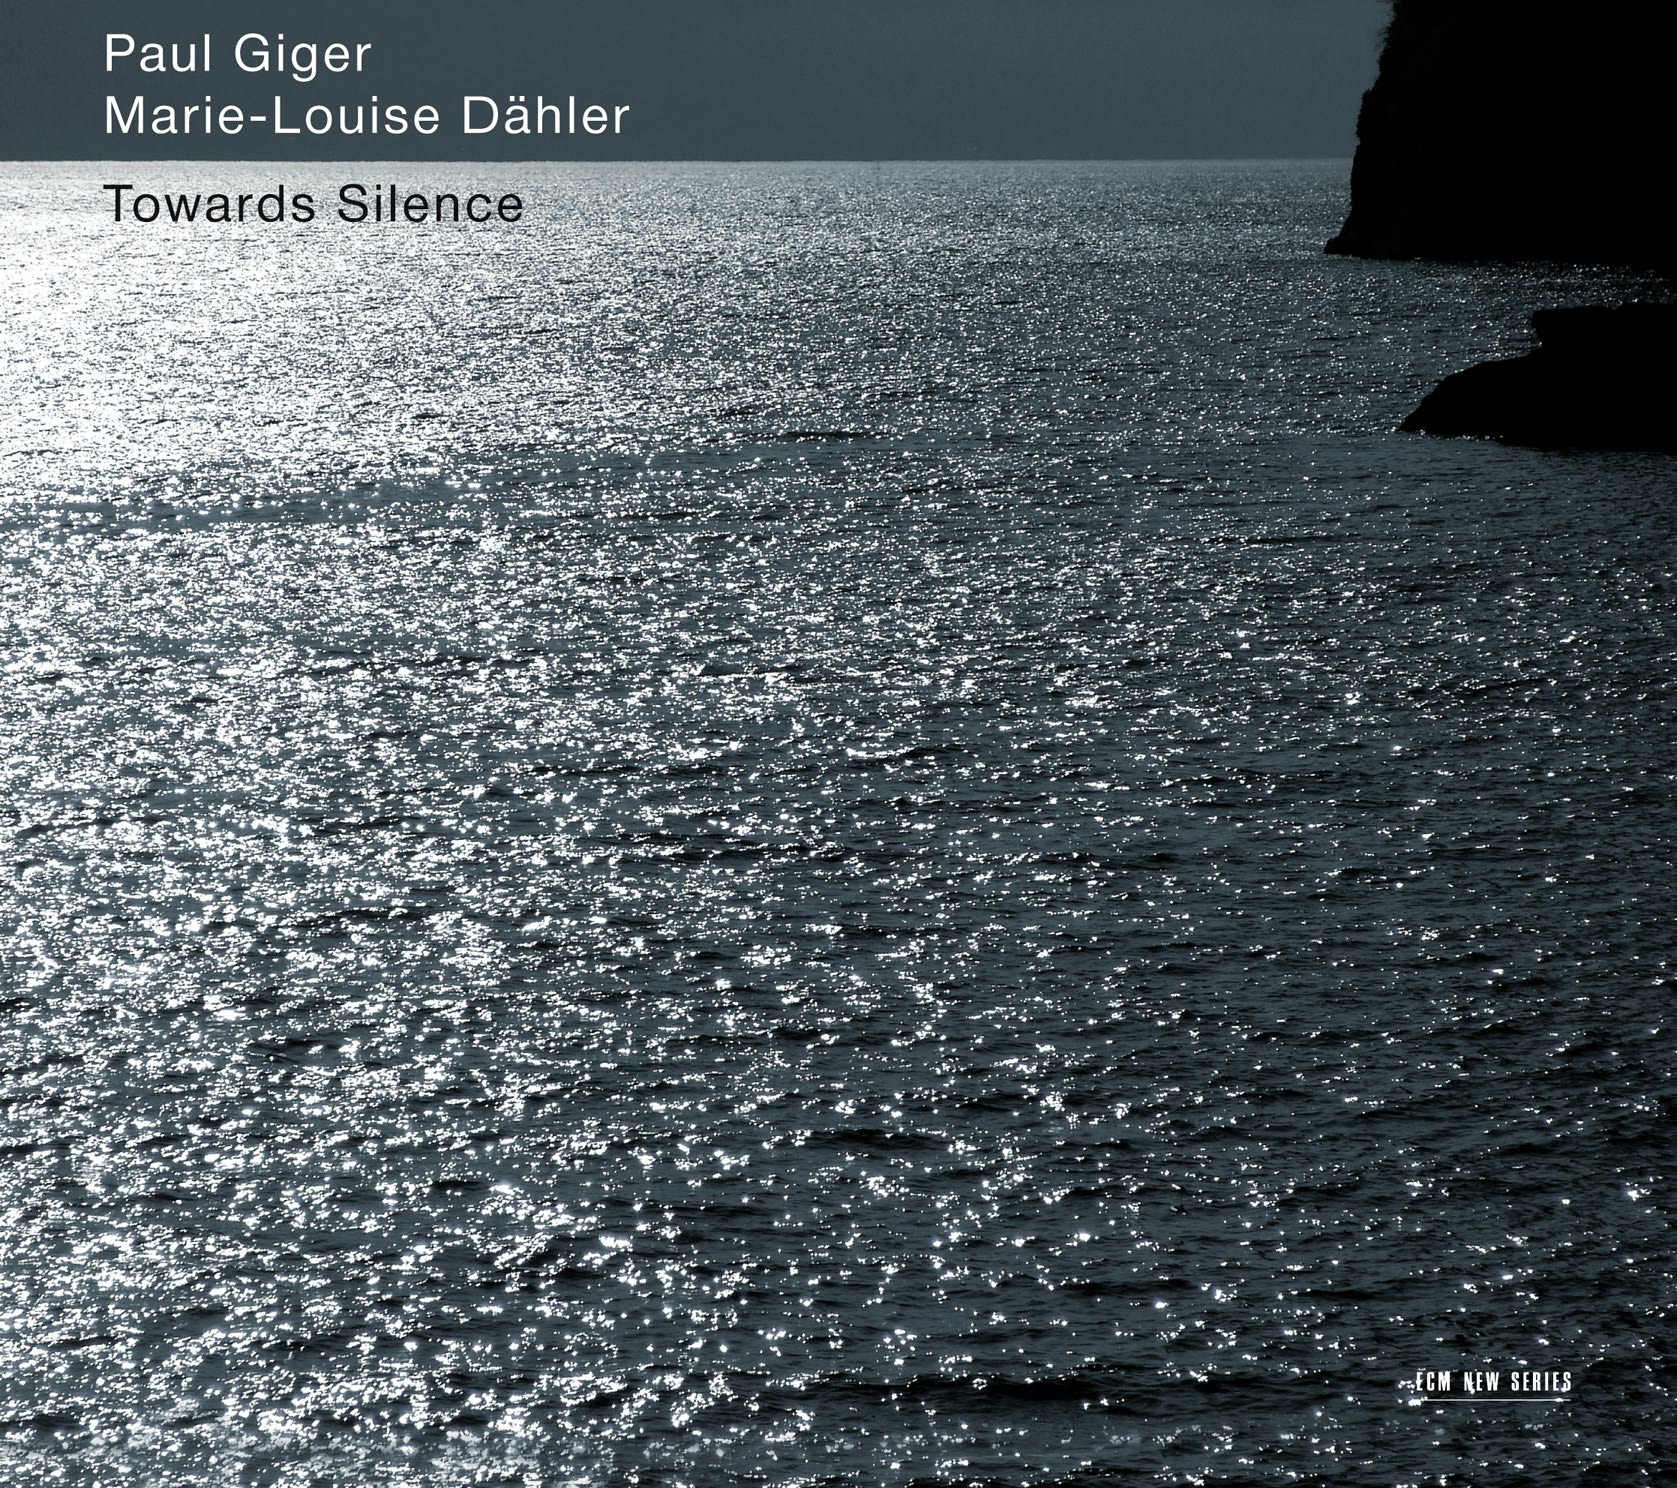 Paul Giger/Marie-Louise Dähler: Towards Silence (ECM New Series 2014) –  Between Sound and Space: ECM Records and Beyond